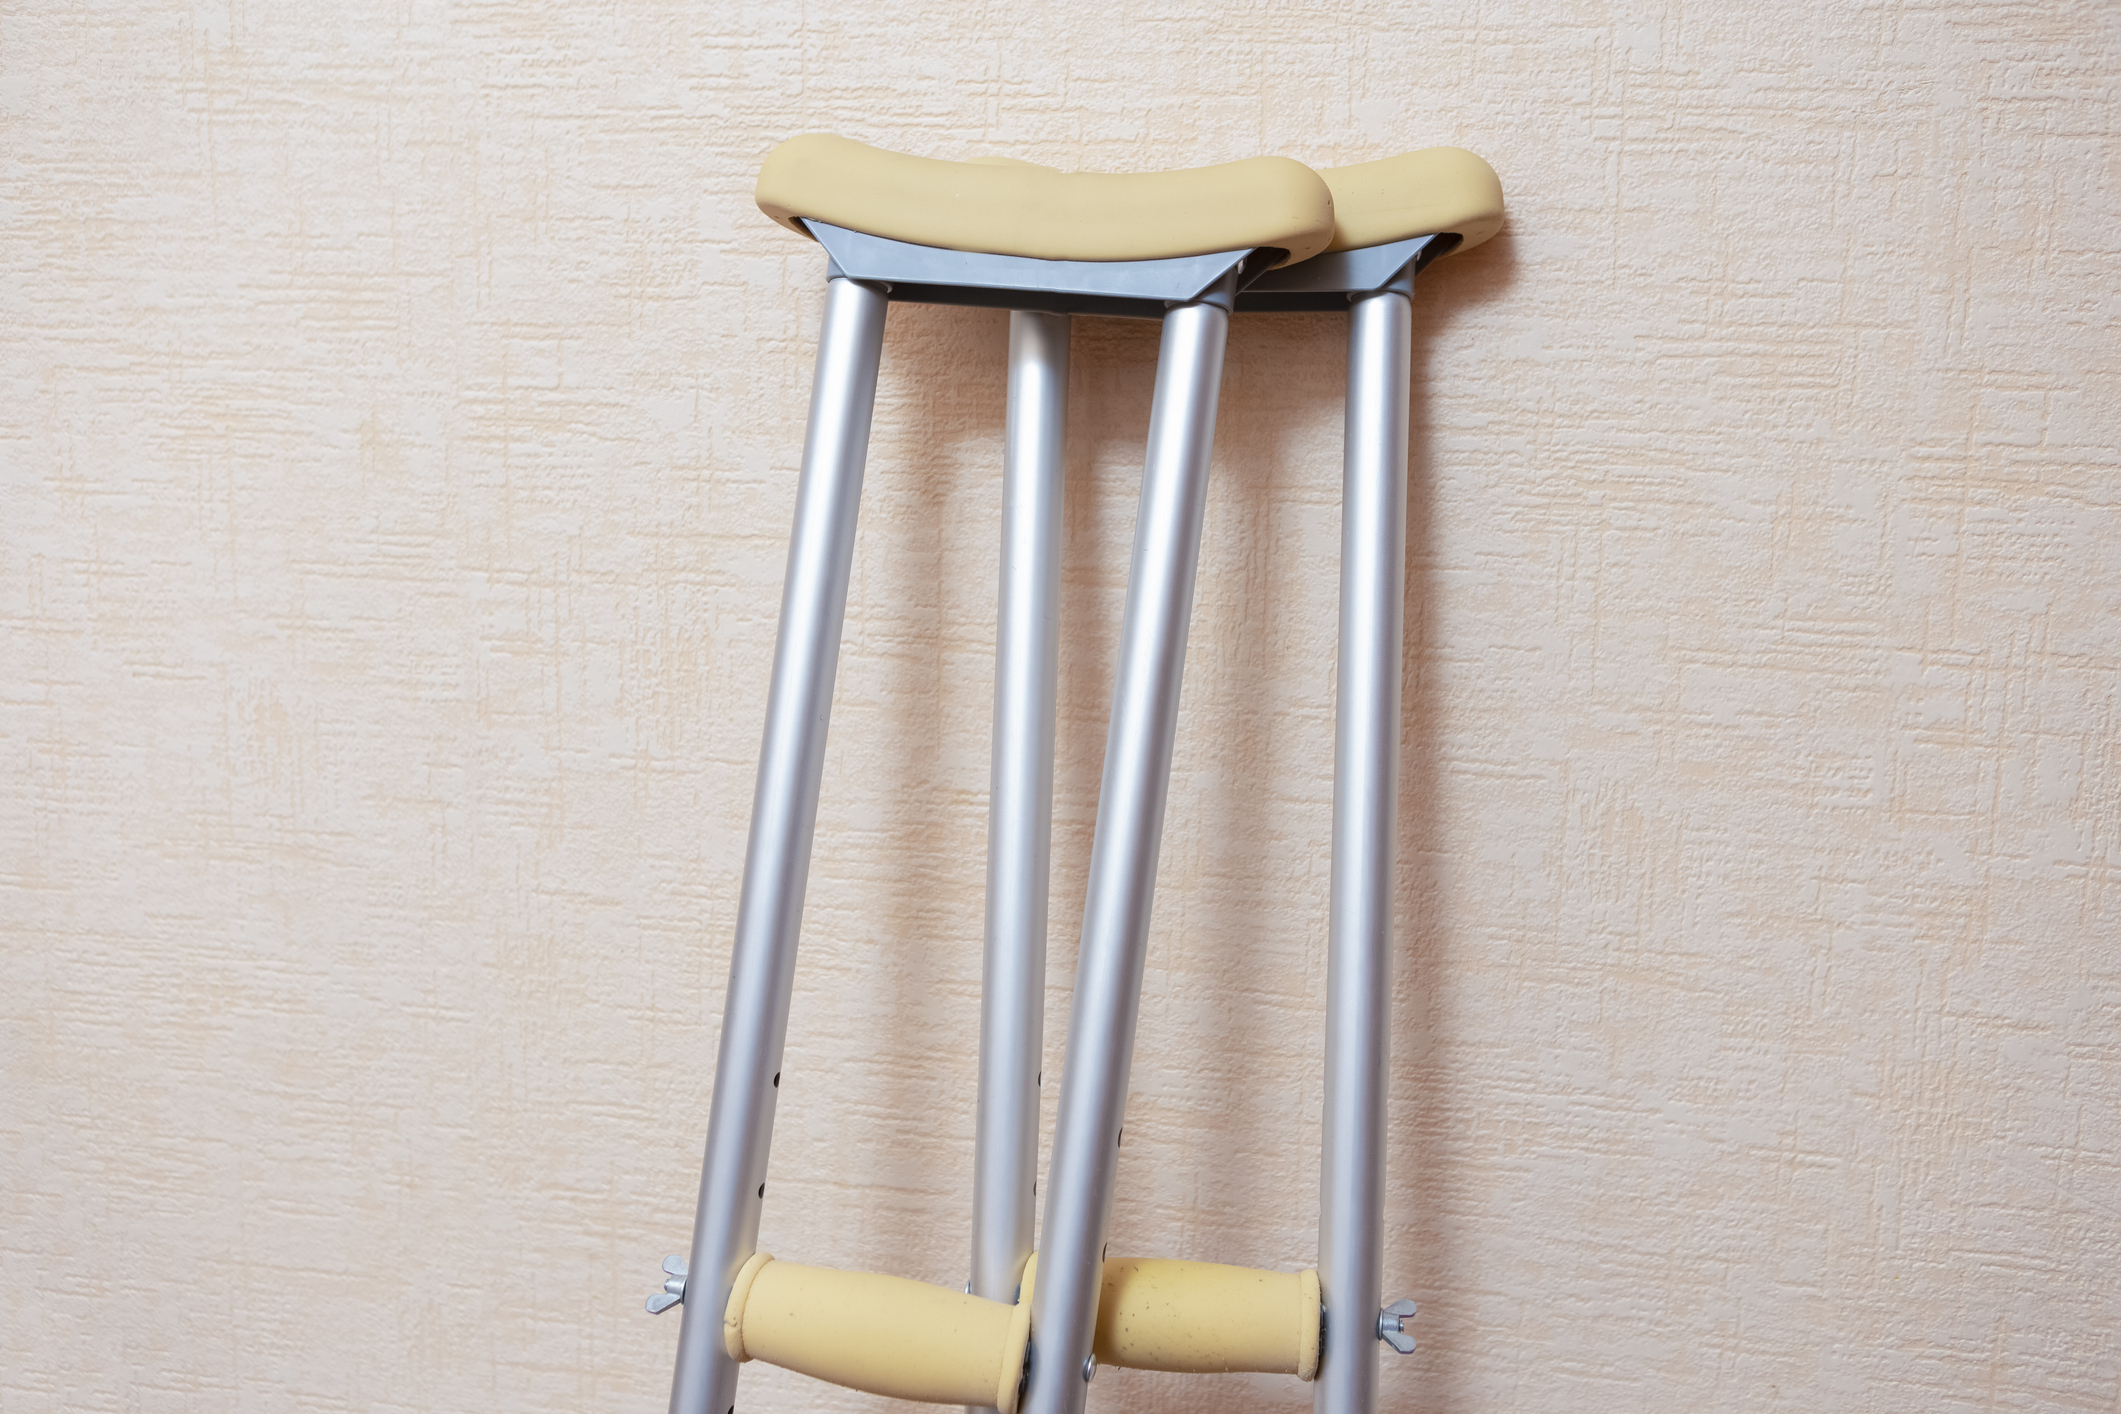 crutches for auto accident injuries